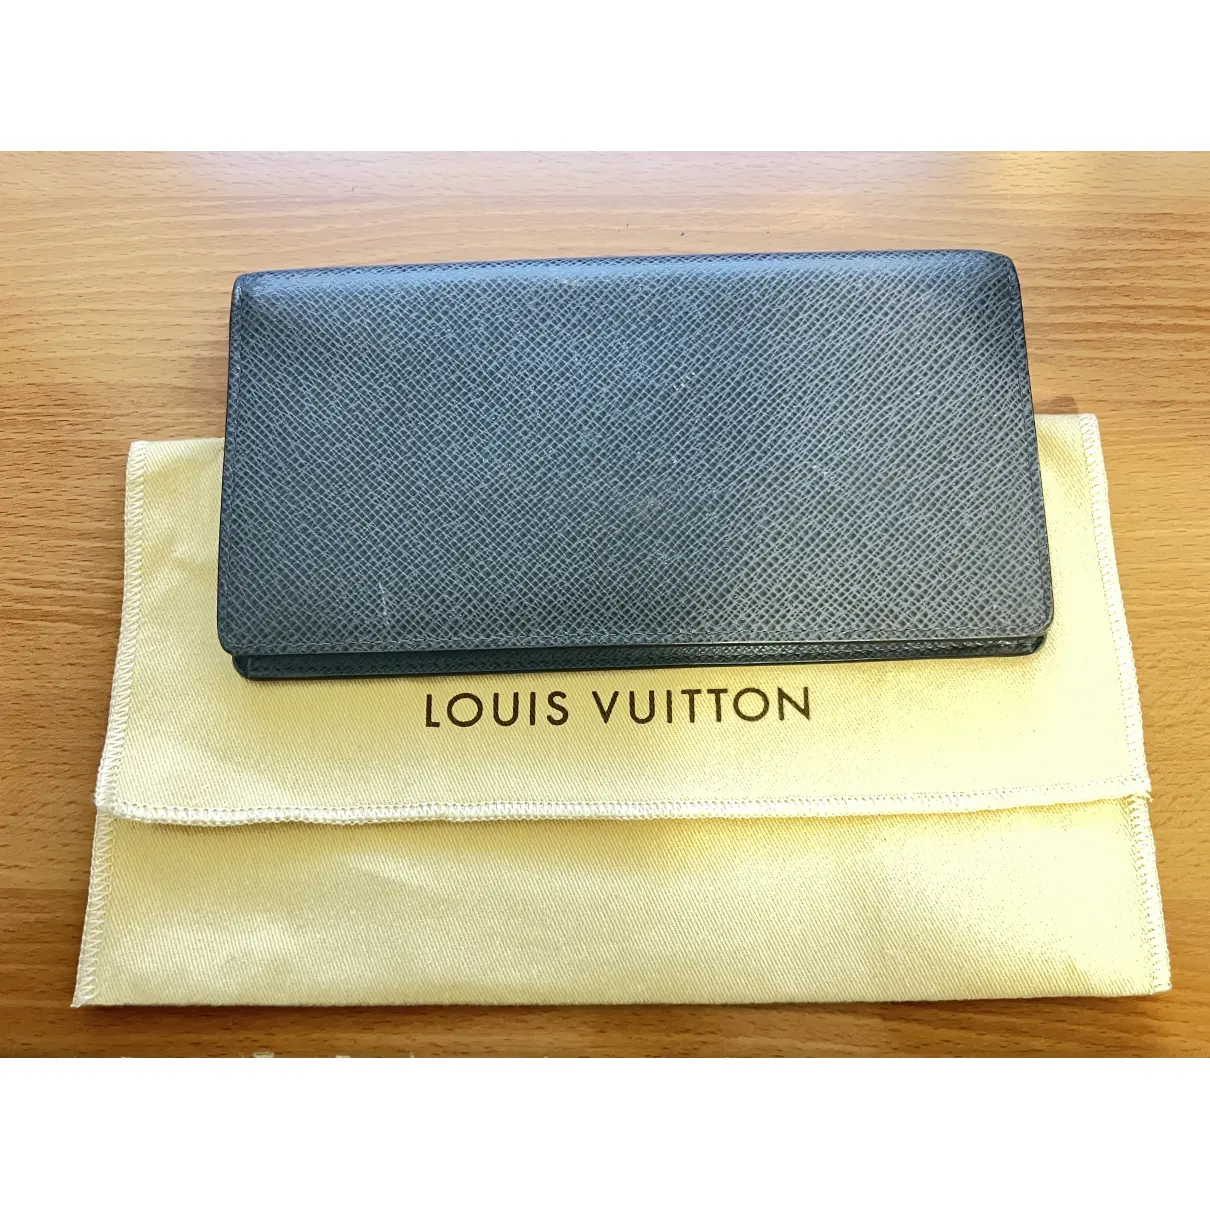 Buy Louis Vuitton Leather small bag online